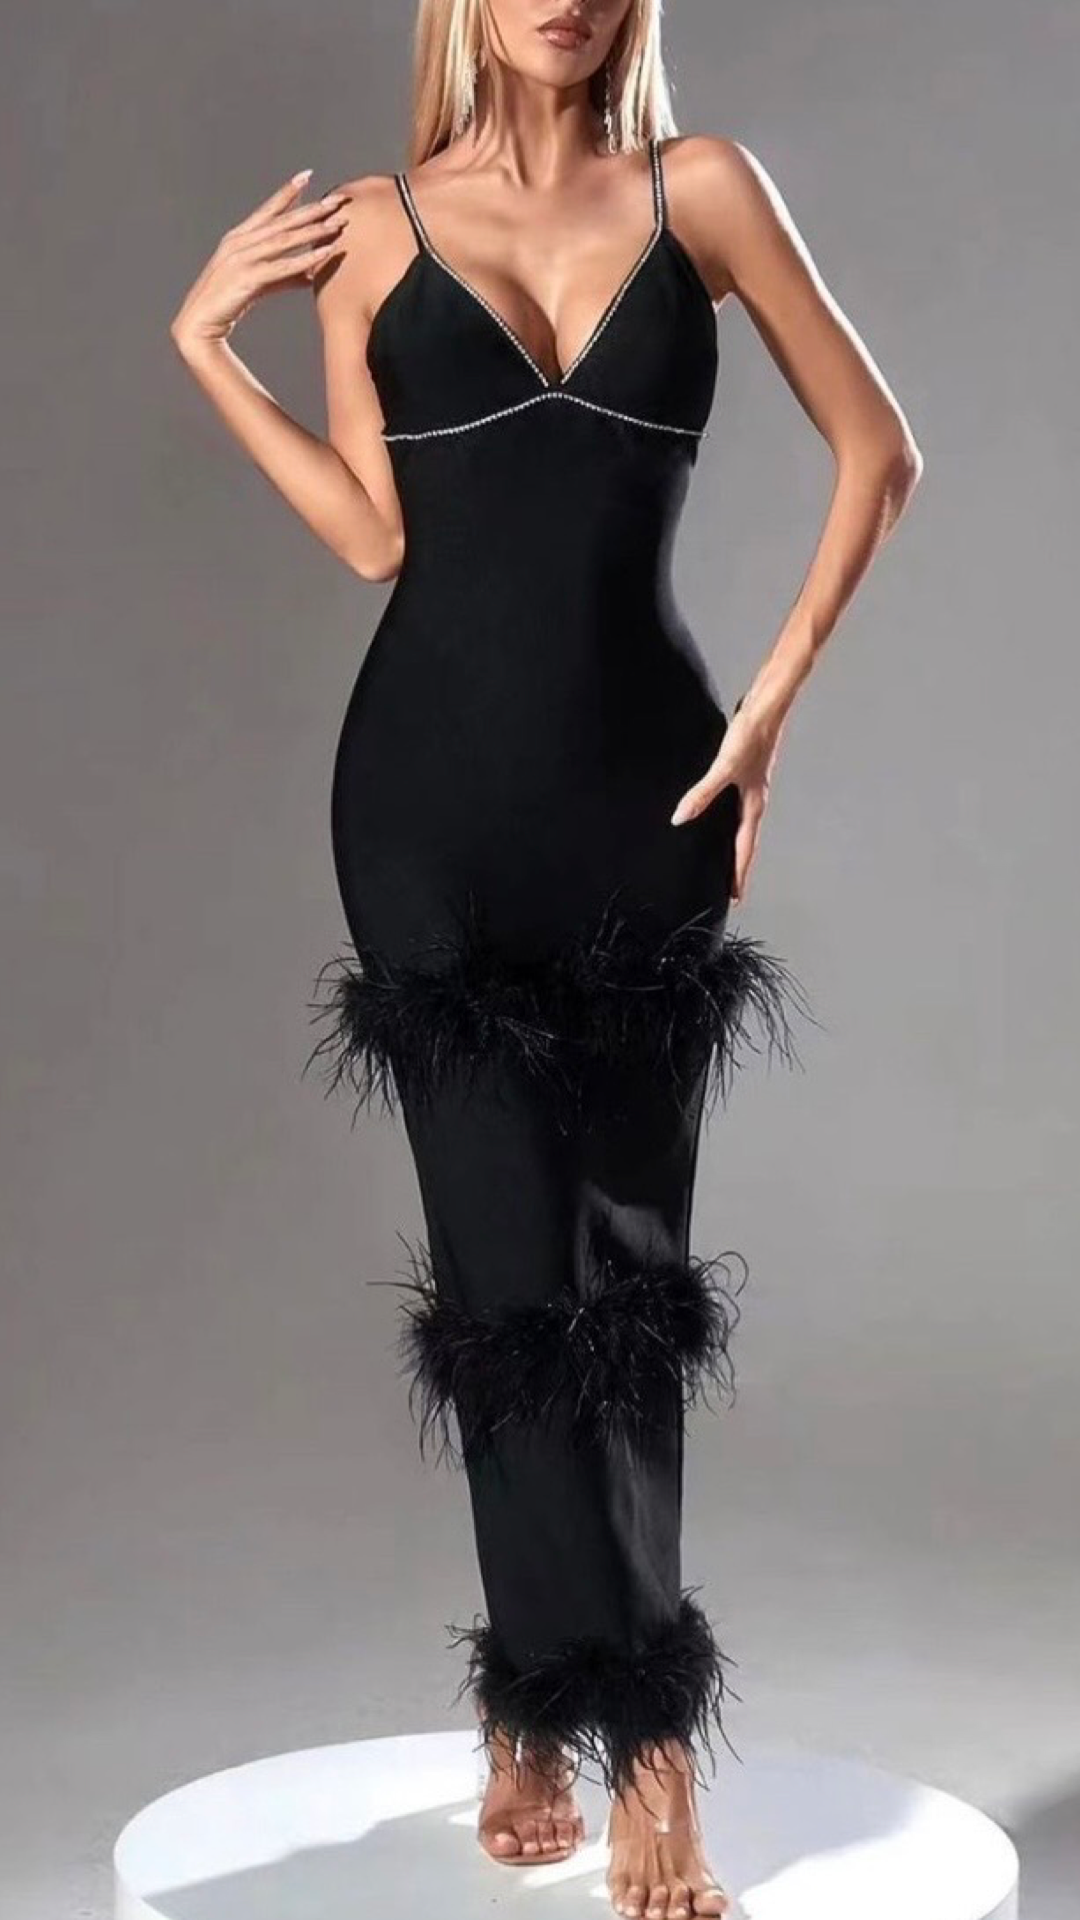 Extremely Beautiful Party Dress for Women | Obscur International